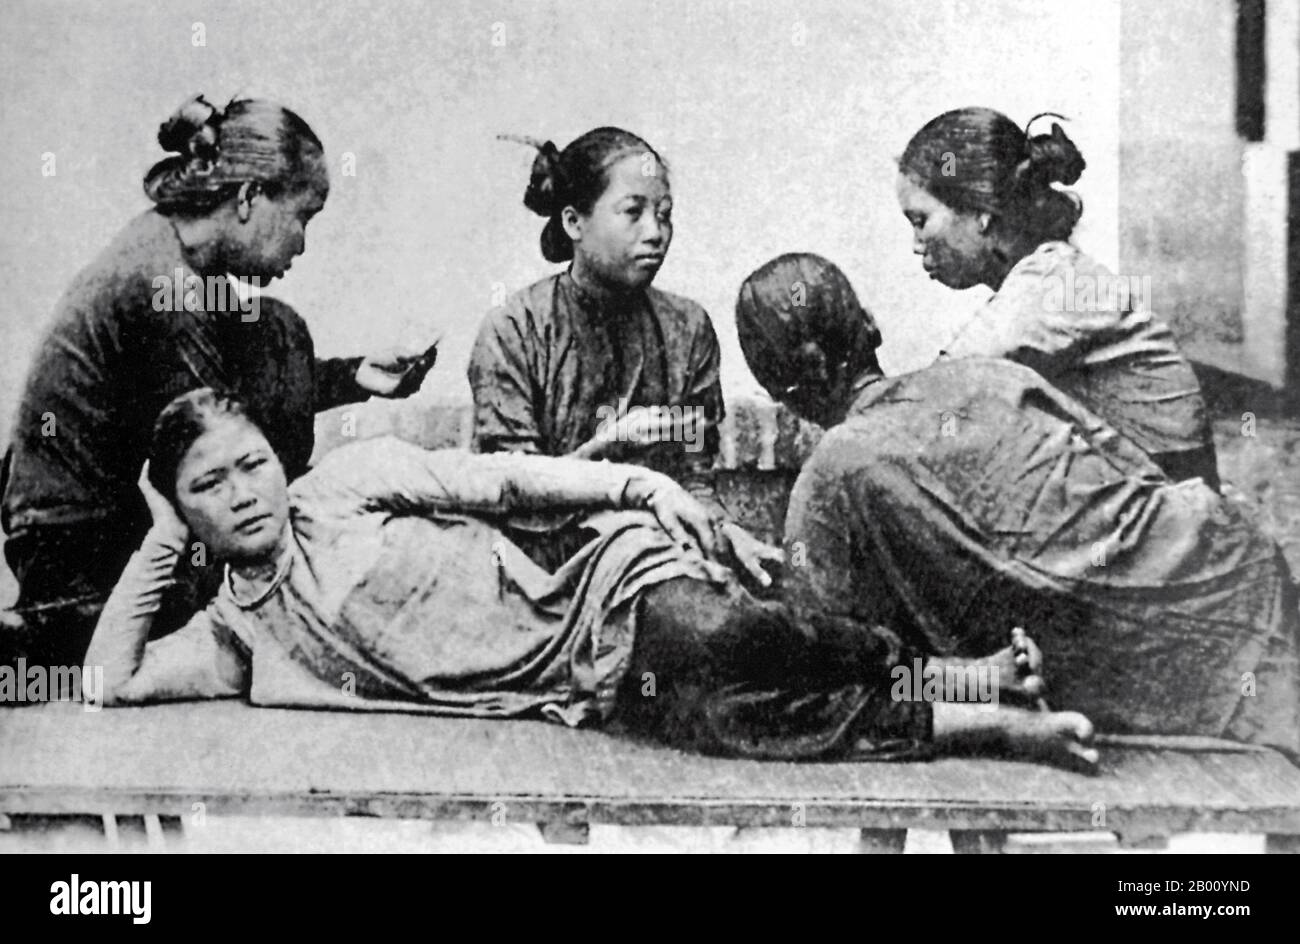 Vietnam: Women playing cards, Saigon, 1907.  Vietnam's independence was gradually eroded by France in a series of military conquests from 1859 until 1885 when the entire country became part of French Indochina. Significant political and cultural changes were placed on the Vietnamese people, including the propagation of Roman Catholicism. When Emperor Thanh Thai, who was opposed to French colonial rule, was exiled in 1907, the French decided to pass the throne to his son who was only seven years old, because they thought someone so young would be easily influenced and controlled. Stock Photo